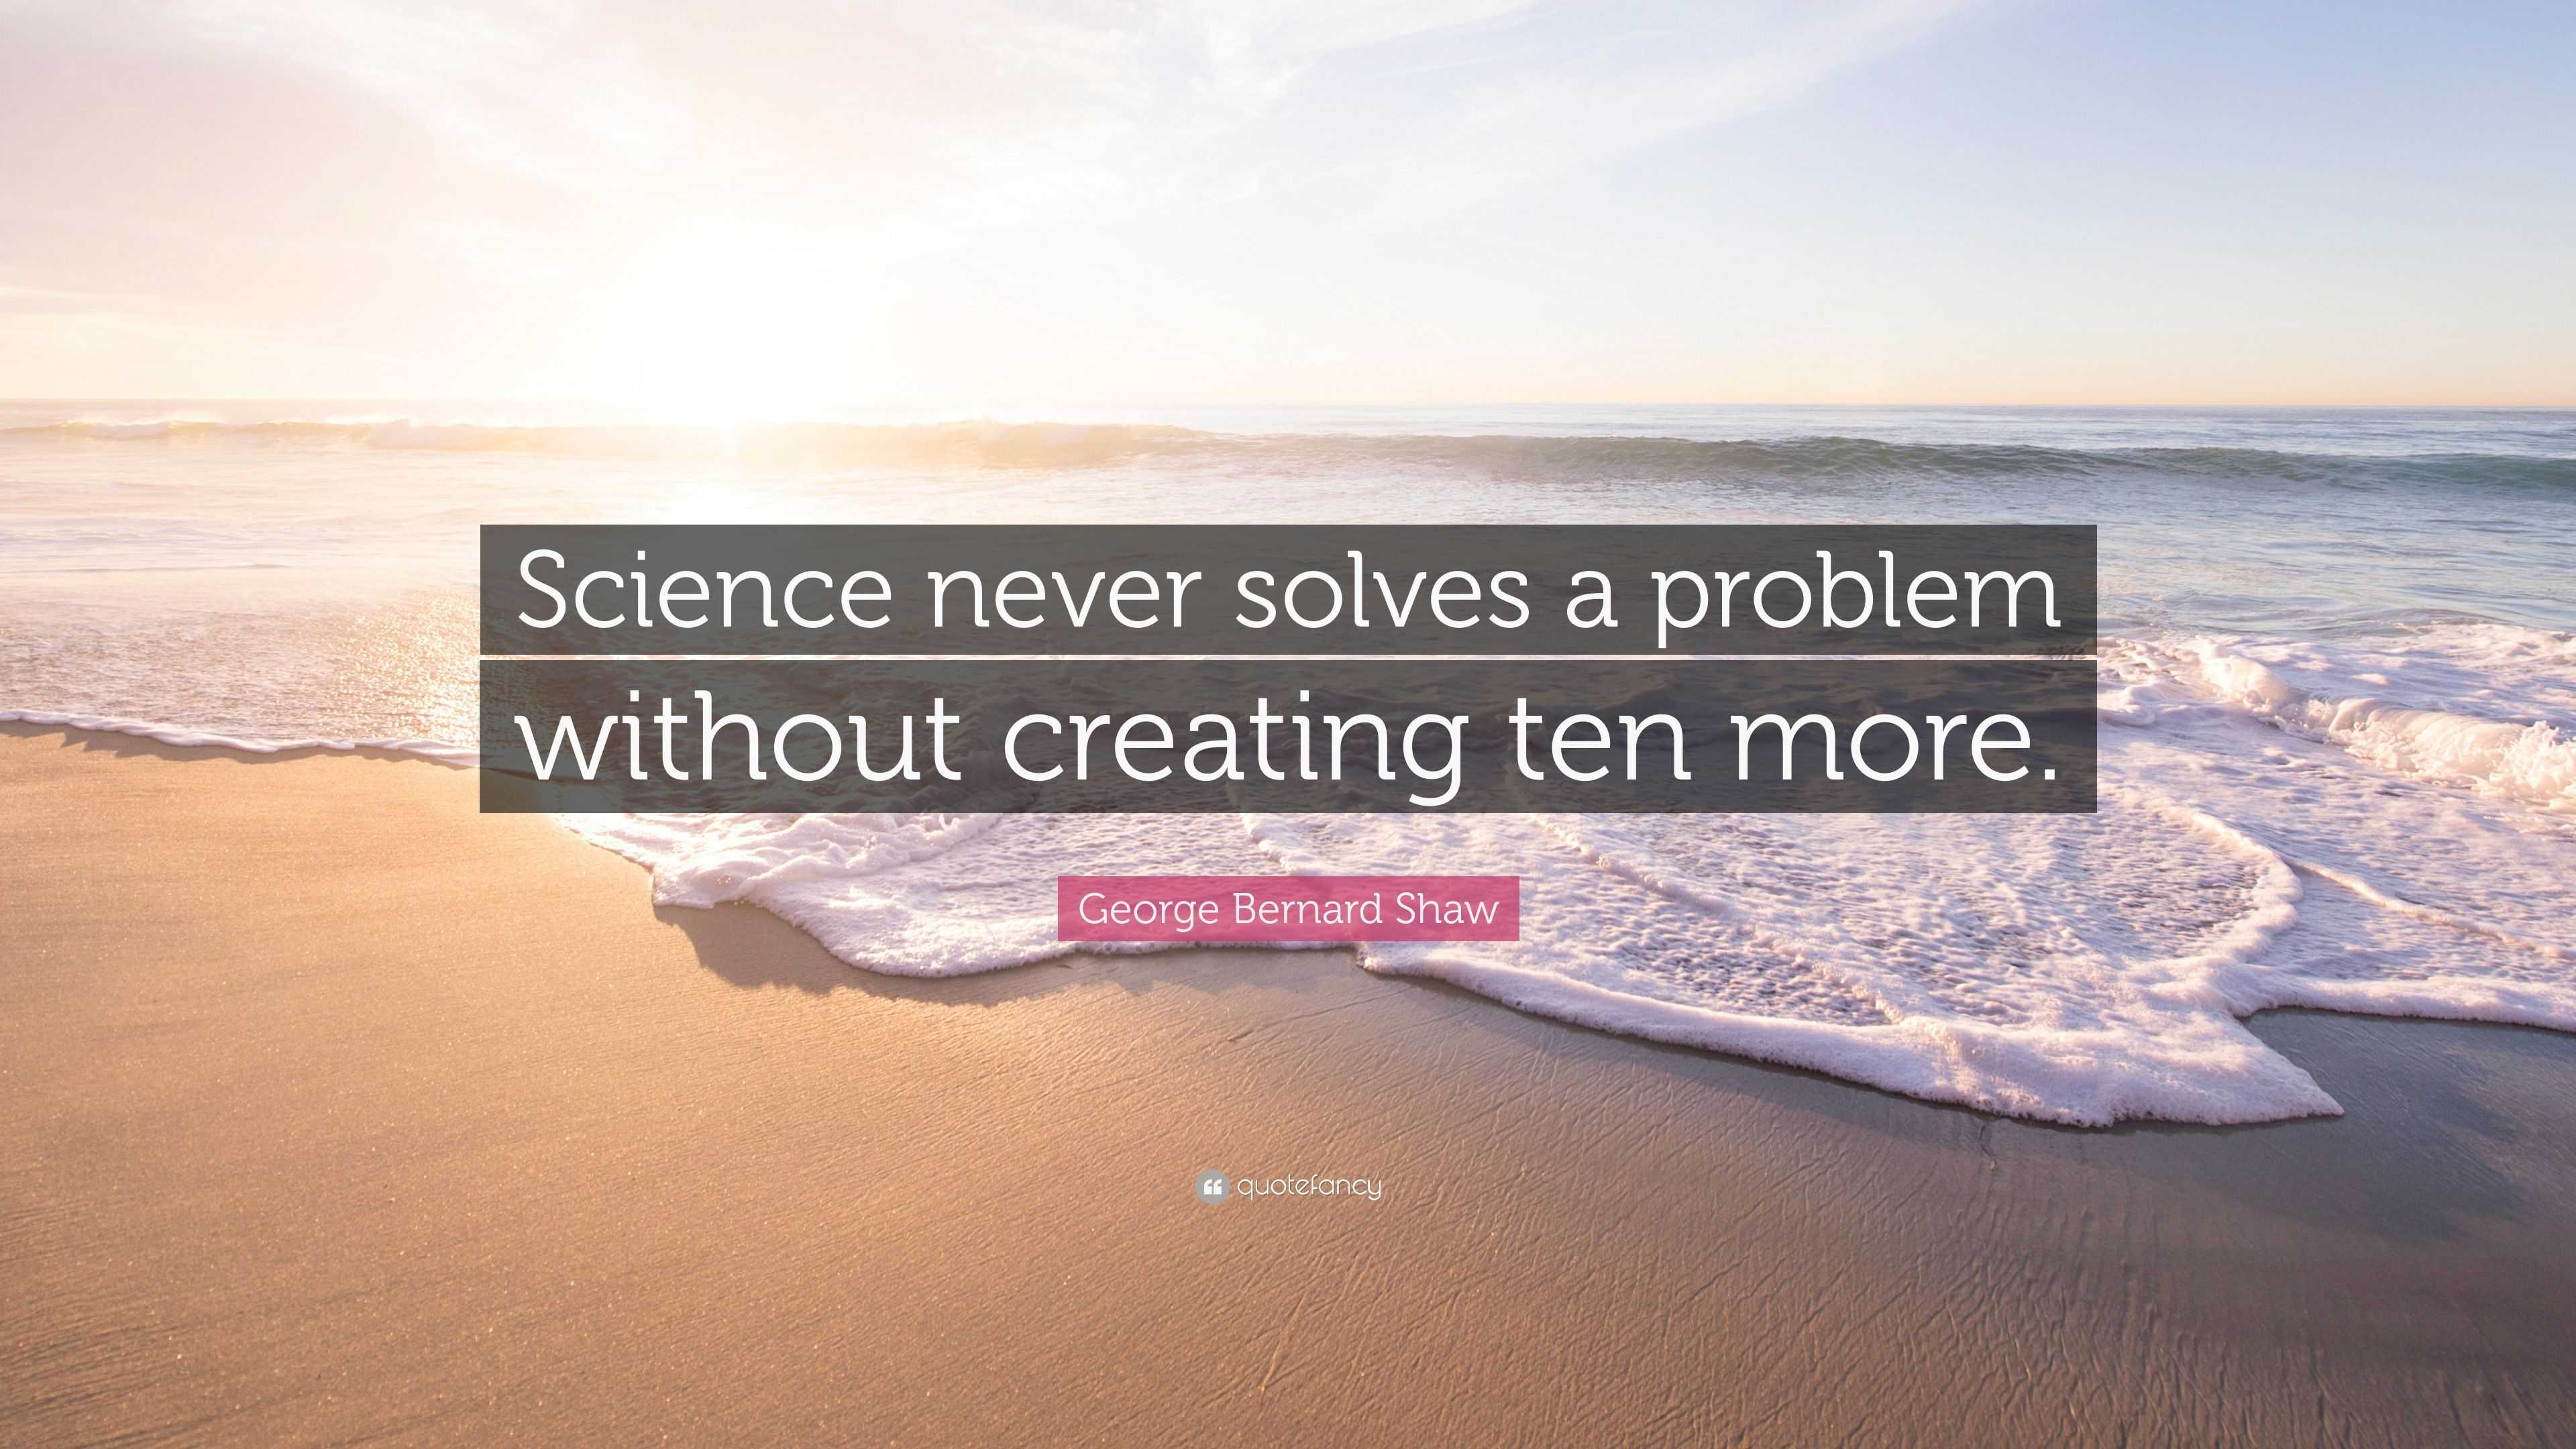 science never solves problems without creating